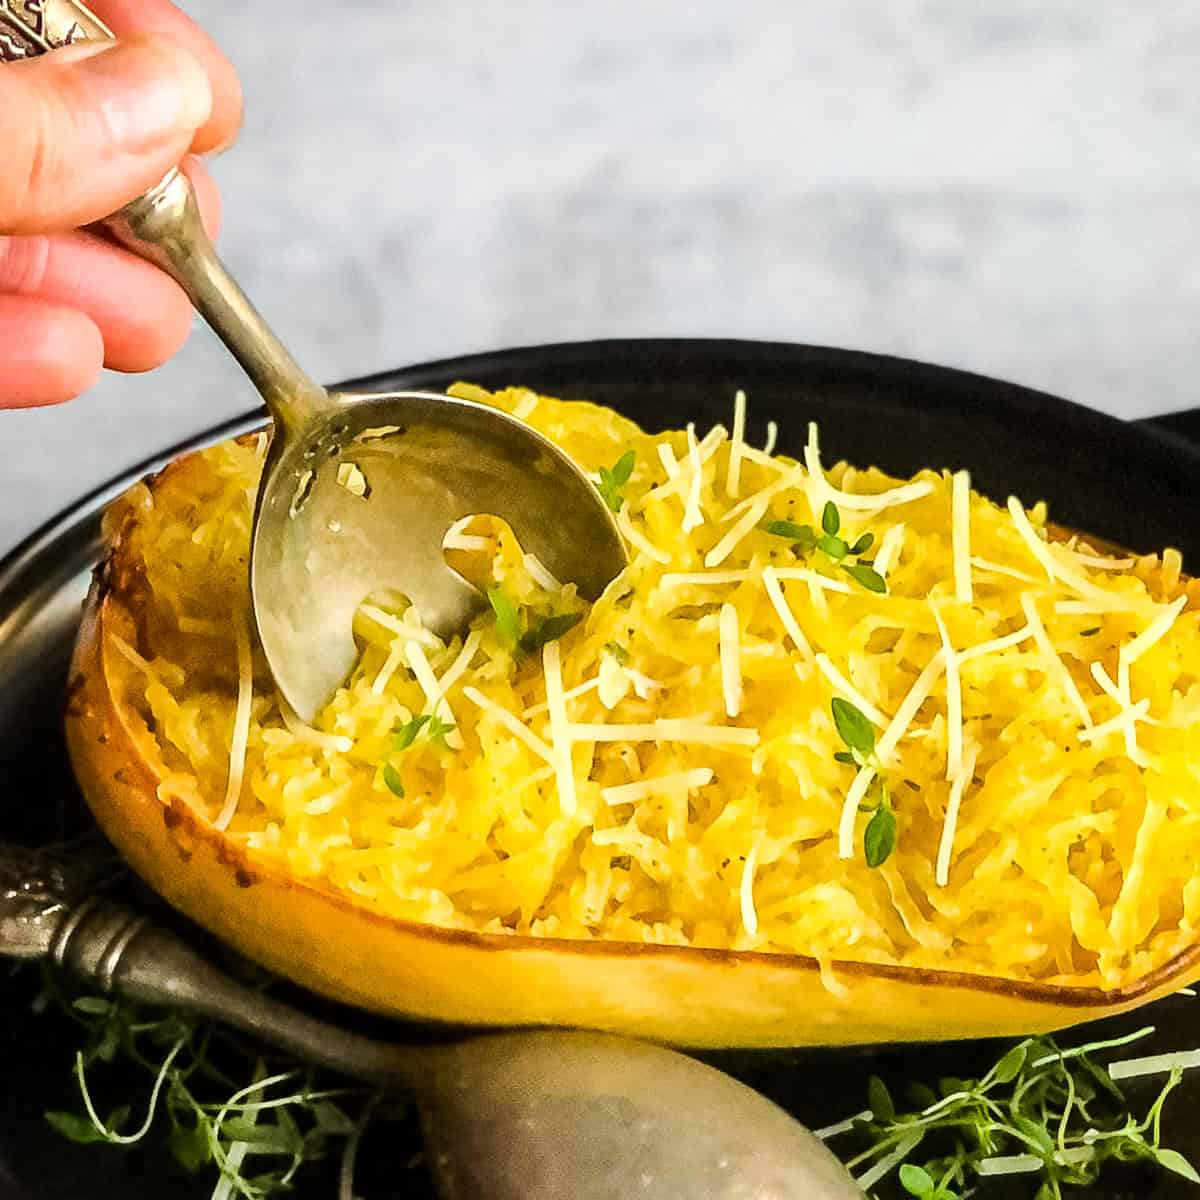 Hand with a spoon digging into Roasted Spaghetti Squash.